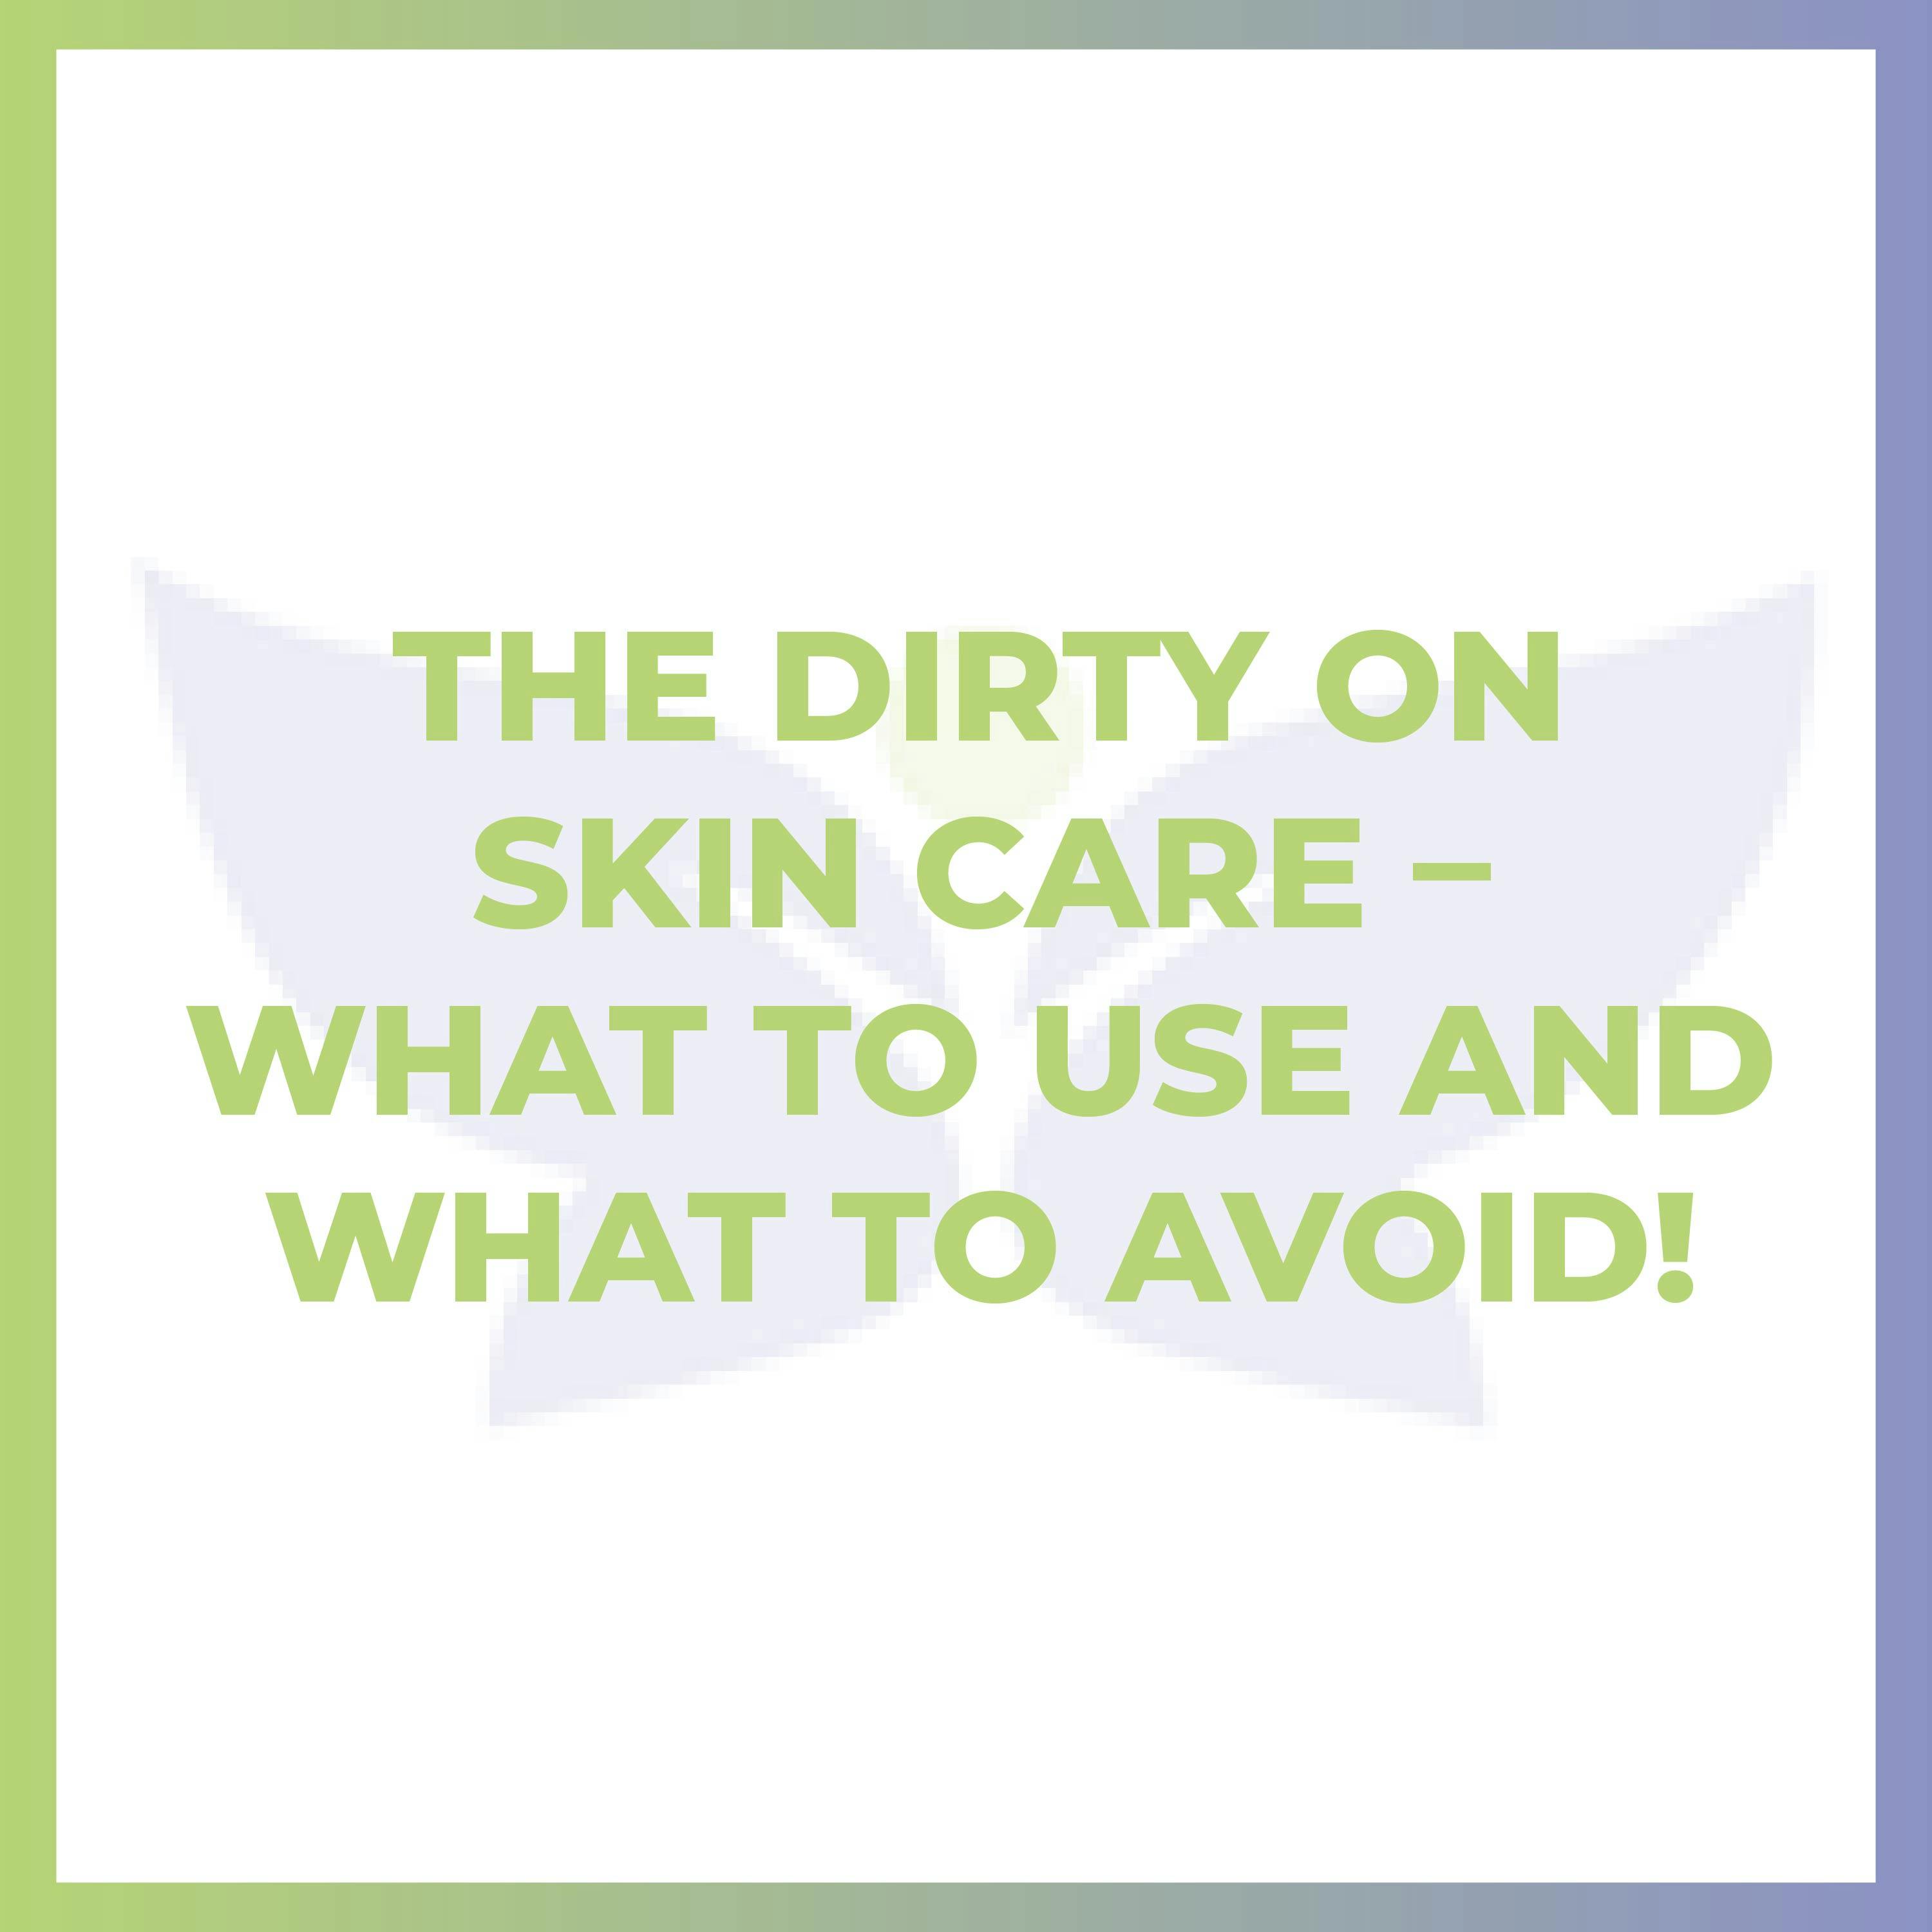 The Dirty on Skin Care – What to Use and What to Avoid!